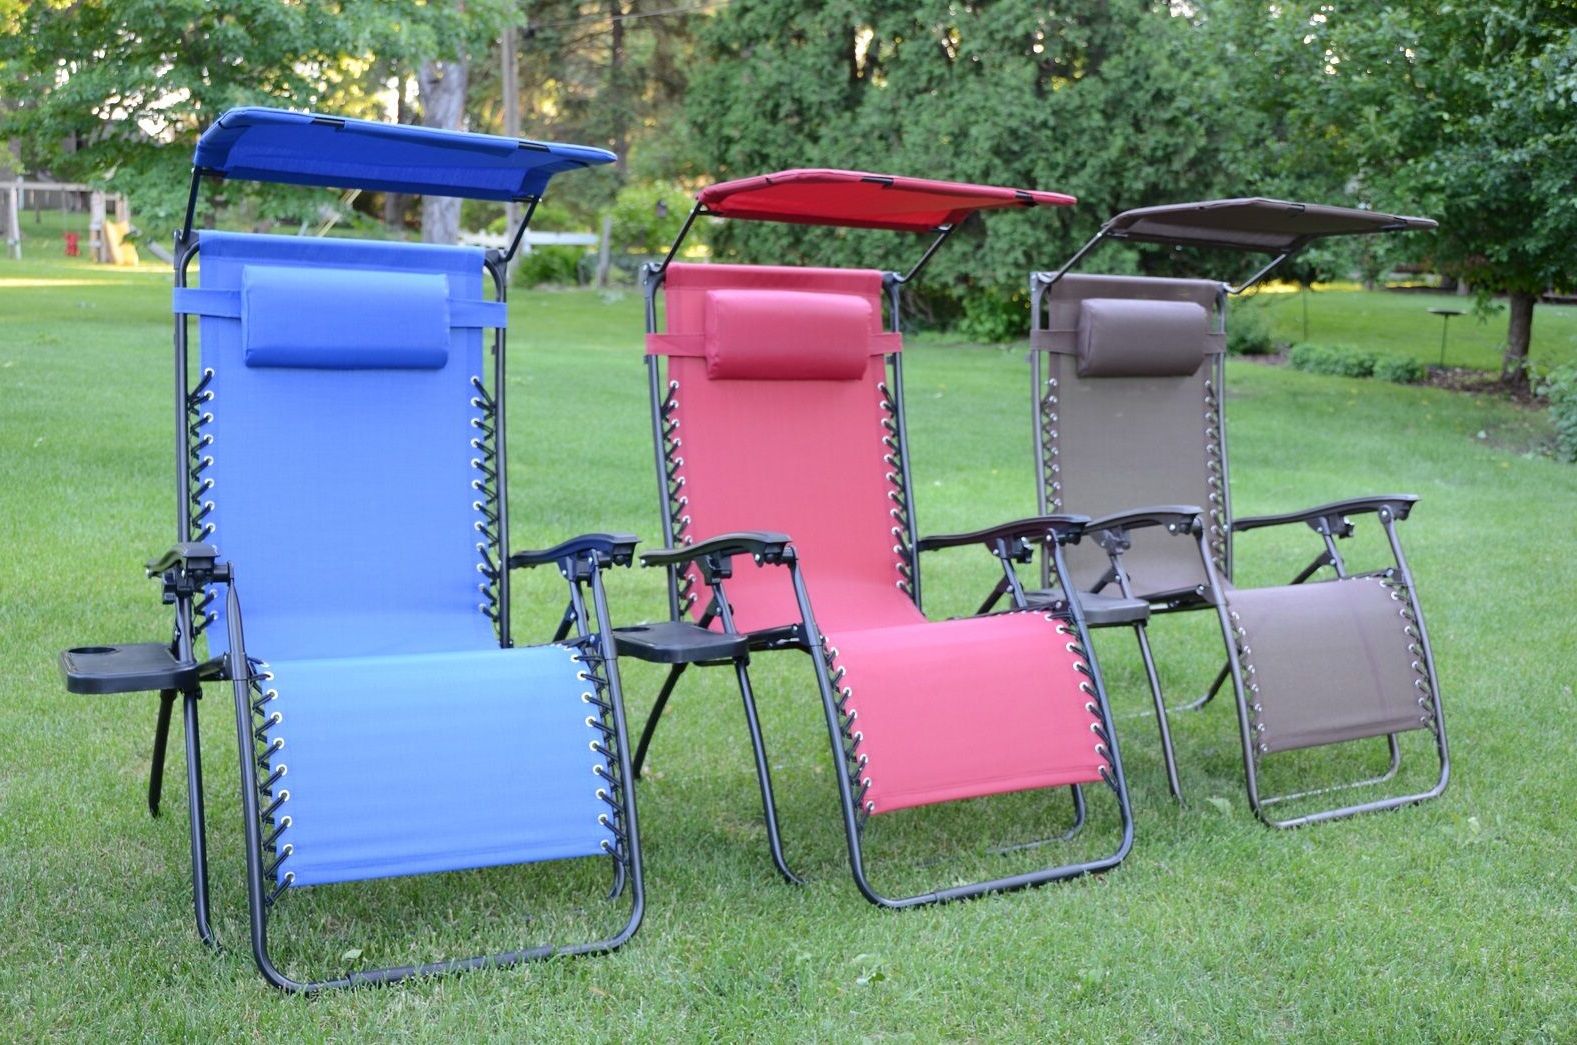 Recent Garden Oversized Chairs With Sunshade And Drink Tray Regarding Deluxe Oversized Extra Large Zero Gravity Chair With Canopy + Detachable  Tray (View 6 of 25)